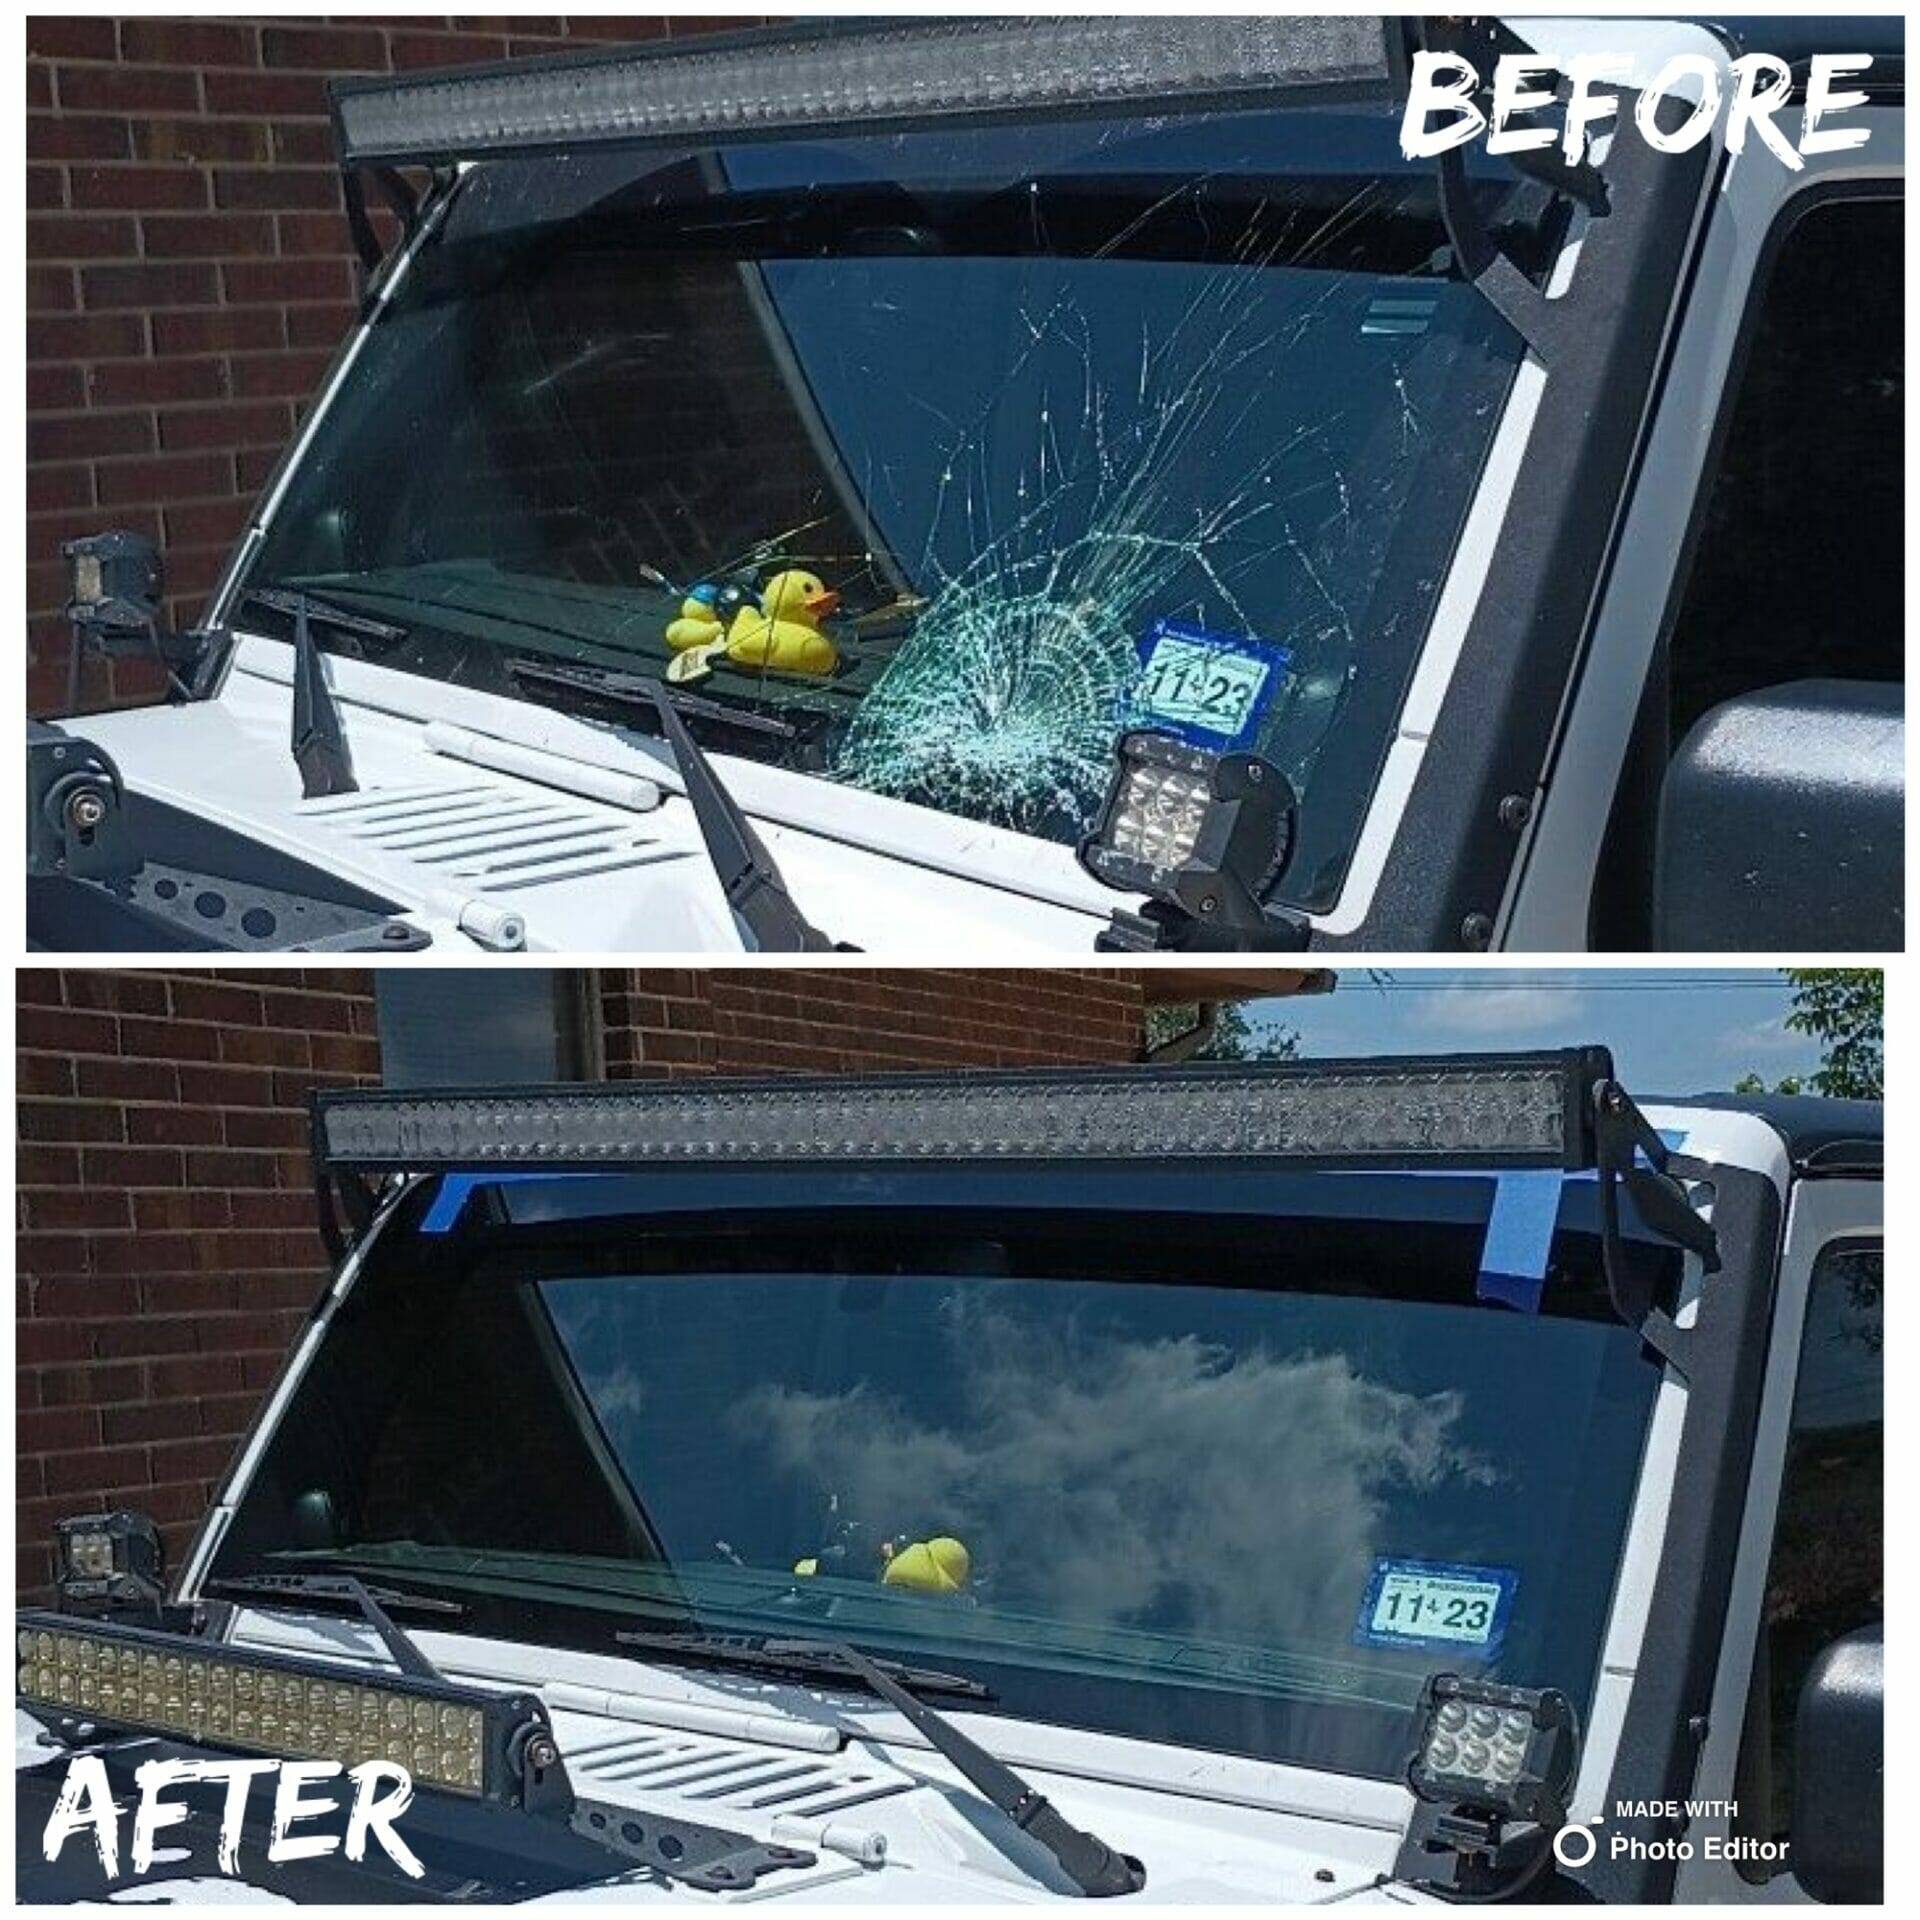 Pre and post repair images: broken 2018 Jeep Wrangler front windshield before repair, new windshield after replacement in Castle Hills, San Antonio, Texas.